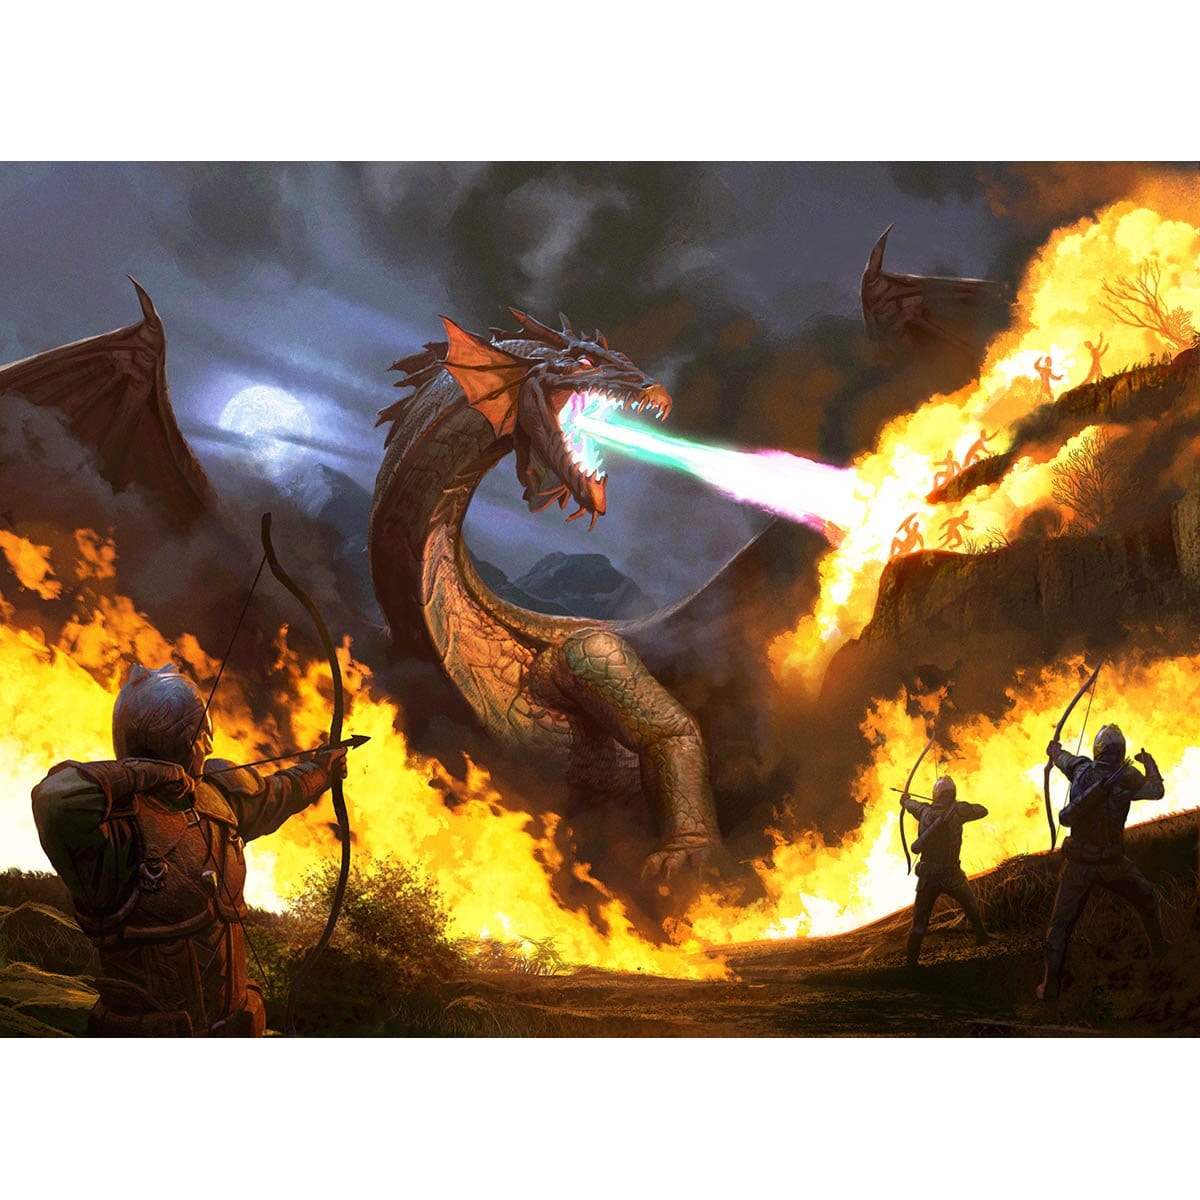 Mana-Charged Dragon Print - Print - Original Magic Art - Accessories for Magic the Gathering and other card games